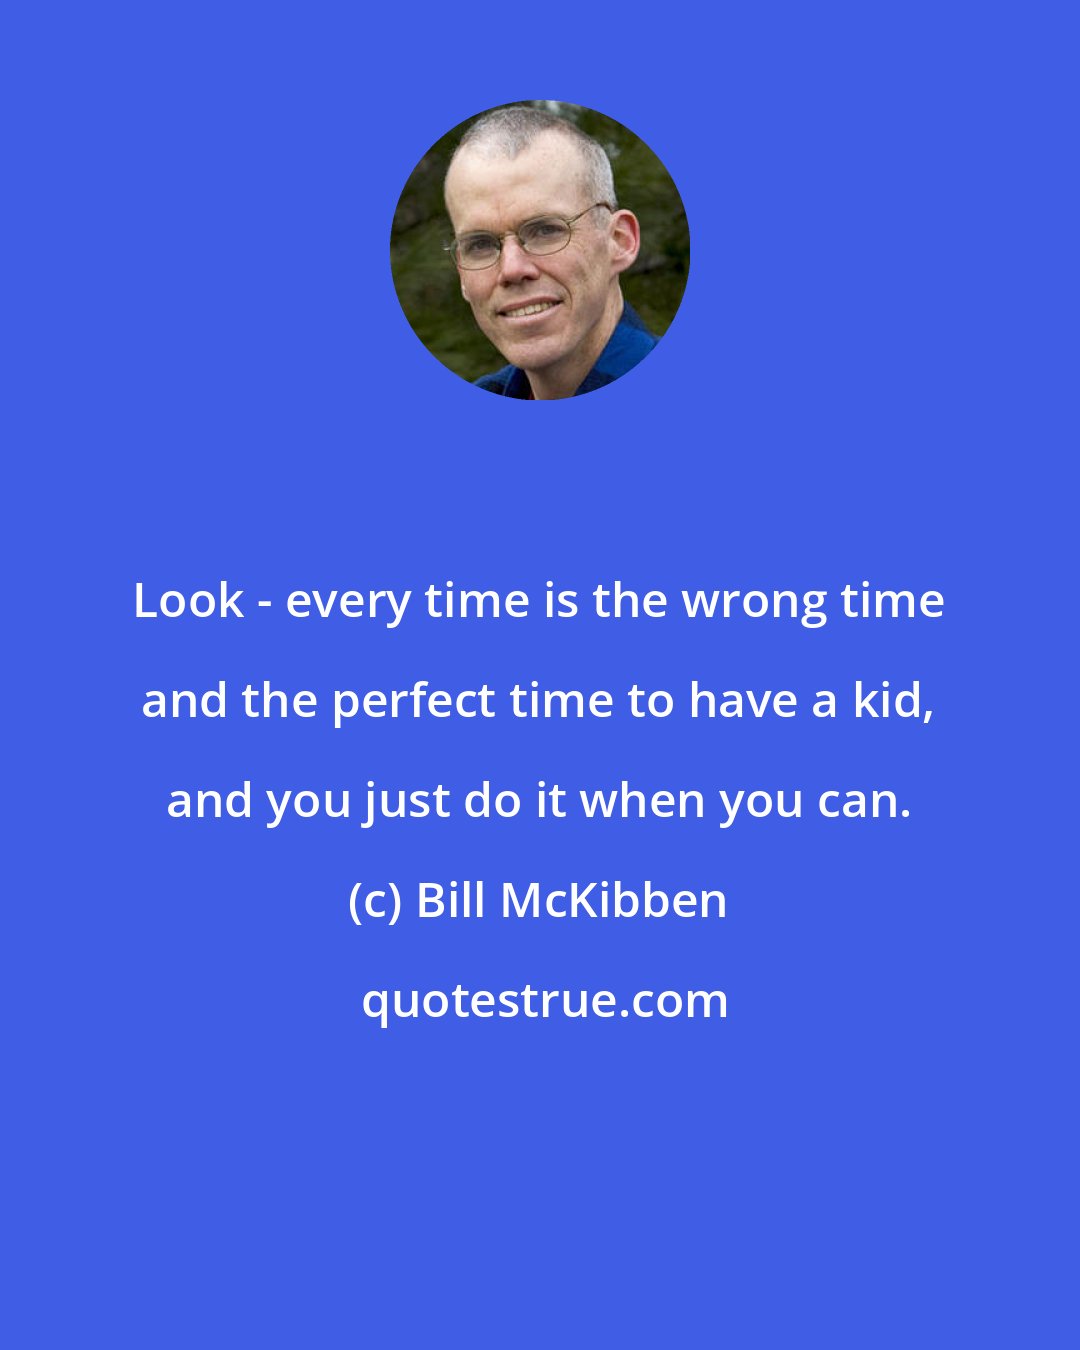 Bill McKibben: Look - every time is the wrong time and the perfect time to have a kid, and you just do it when you can.